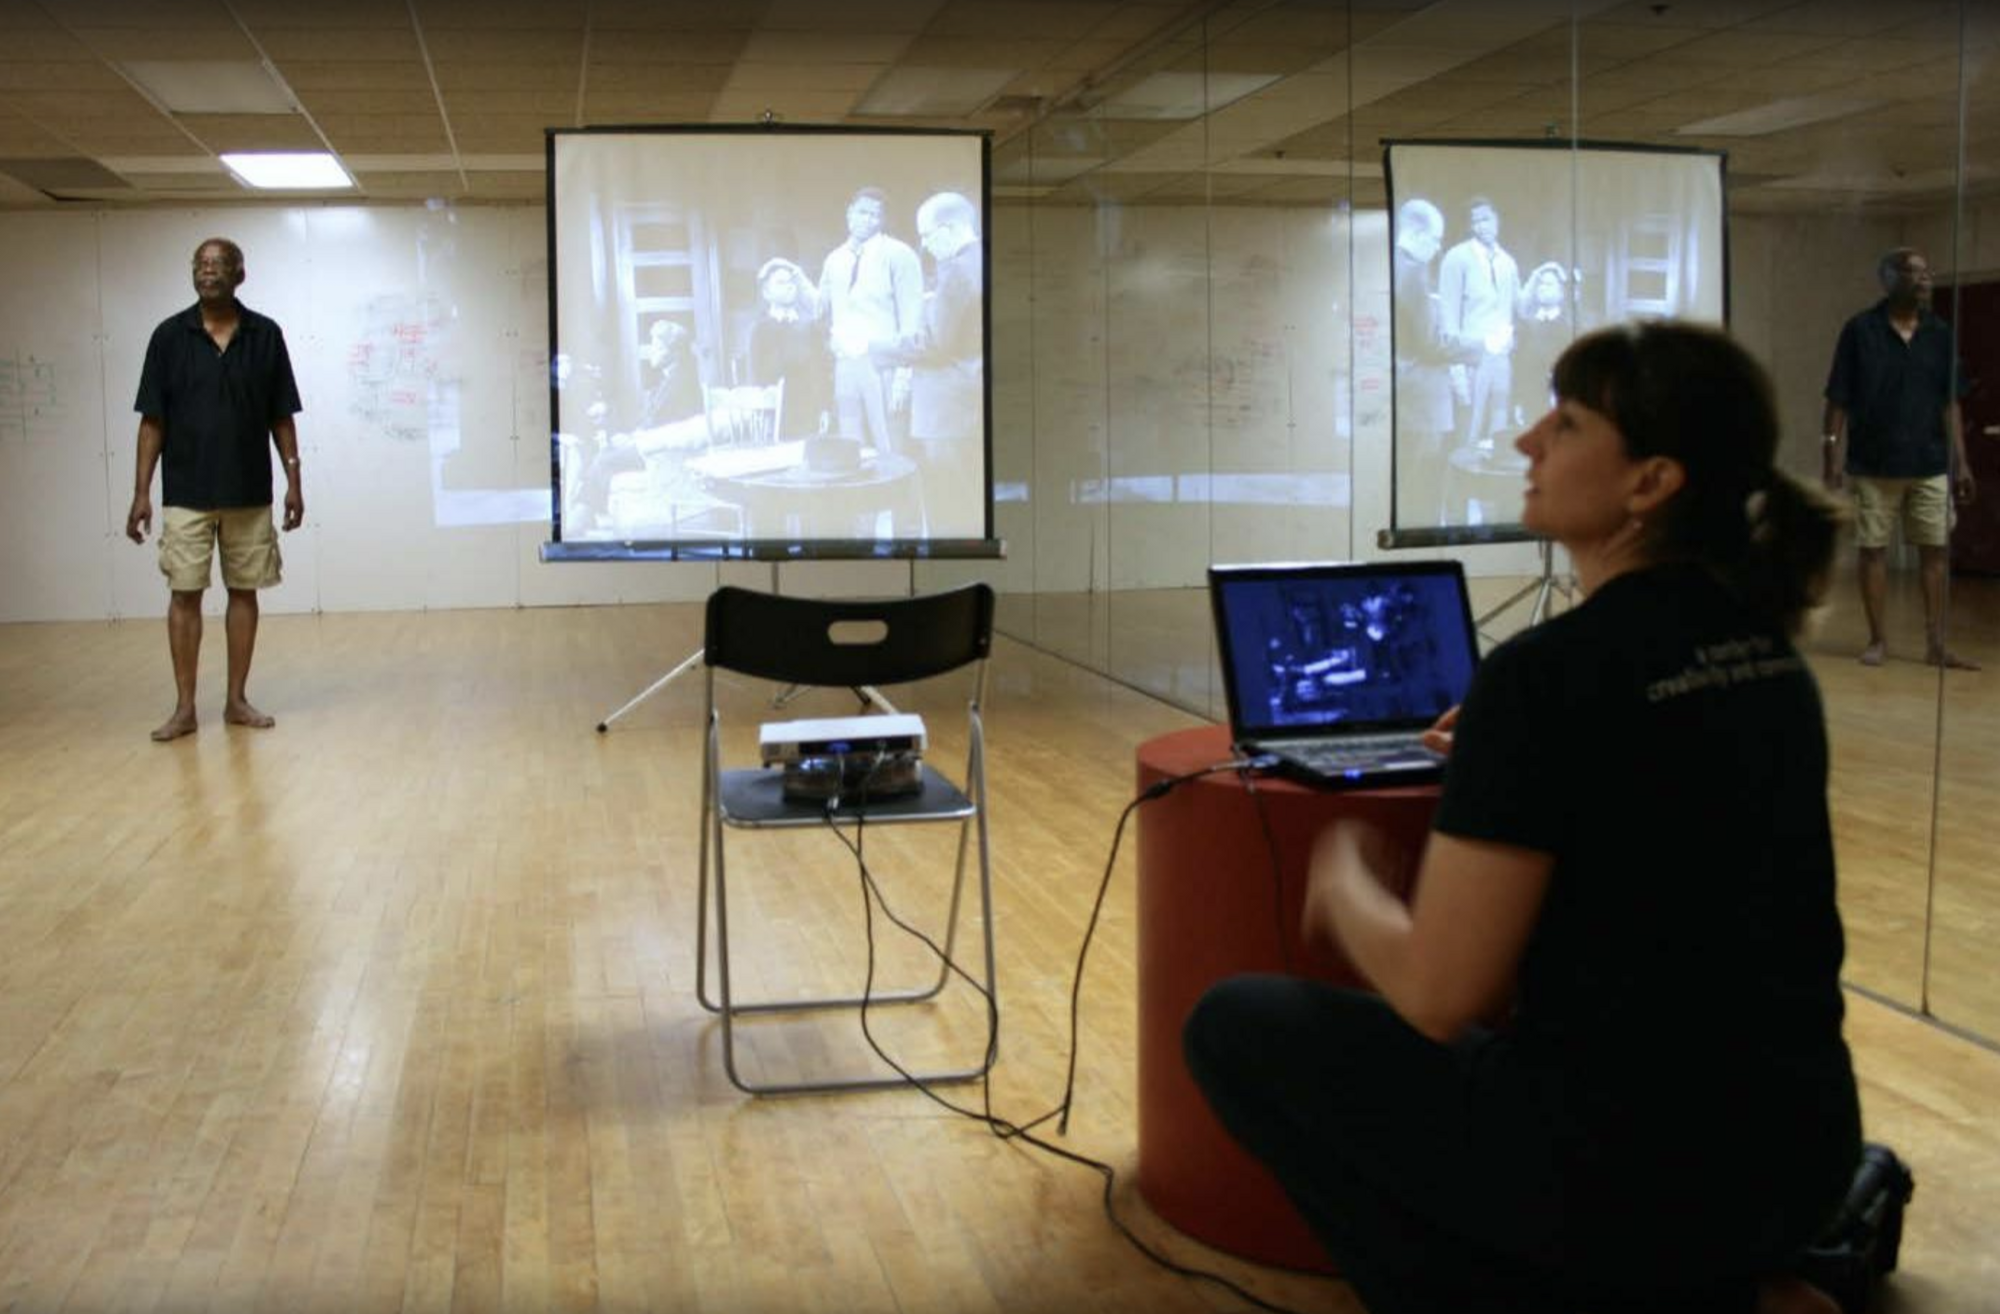 In a mirrored rehearsal room, a man stands next to a projection screen while a woman sits with a laptop and manages the images being shown on the projector.